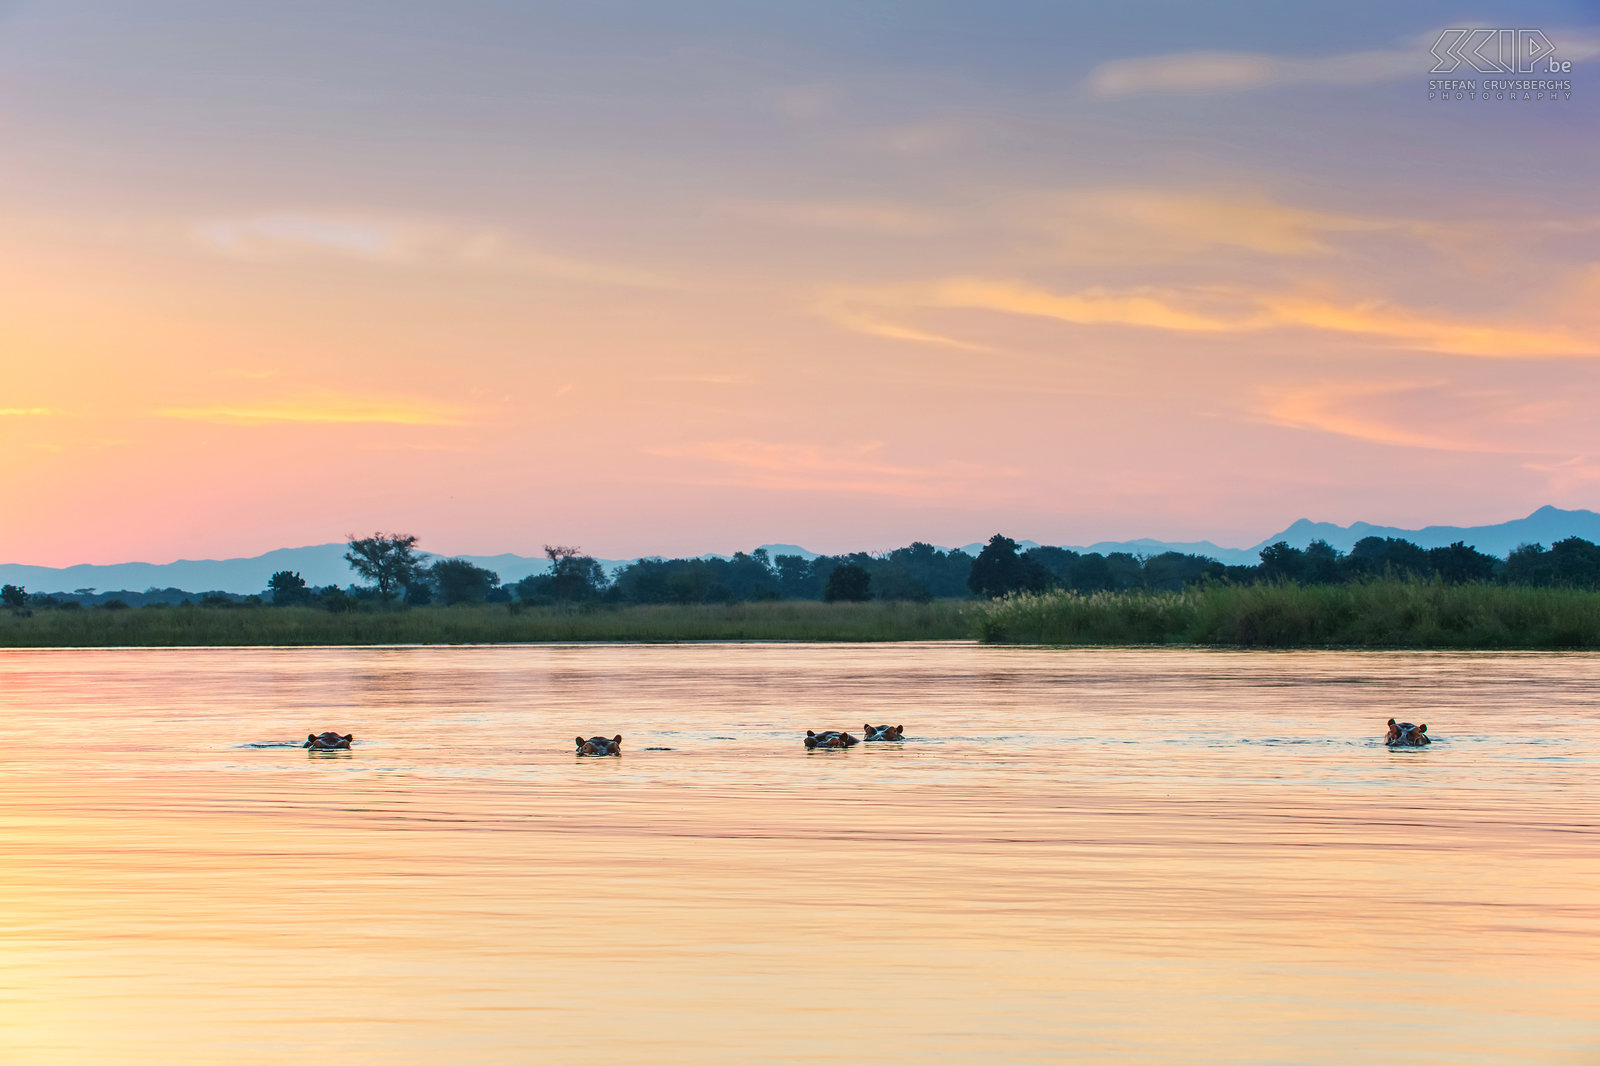 Lower Zambezi - Hippos at sunset The Zambezi River has the highest density of hippo and Nile crocodiles: 33 hippos and six adult crocodiles per kilometre. Everywhere you can find pods of hippos. They are vegetarian animals and they graze at night. The hippopotamus spends most of the day in or near water. Stefan Cruysberghs